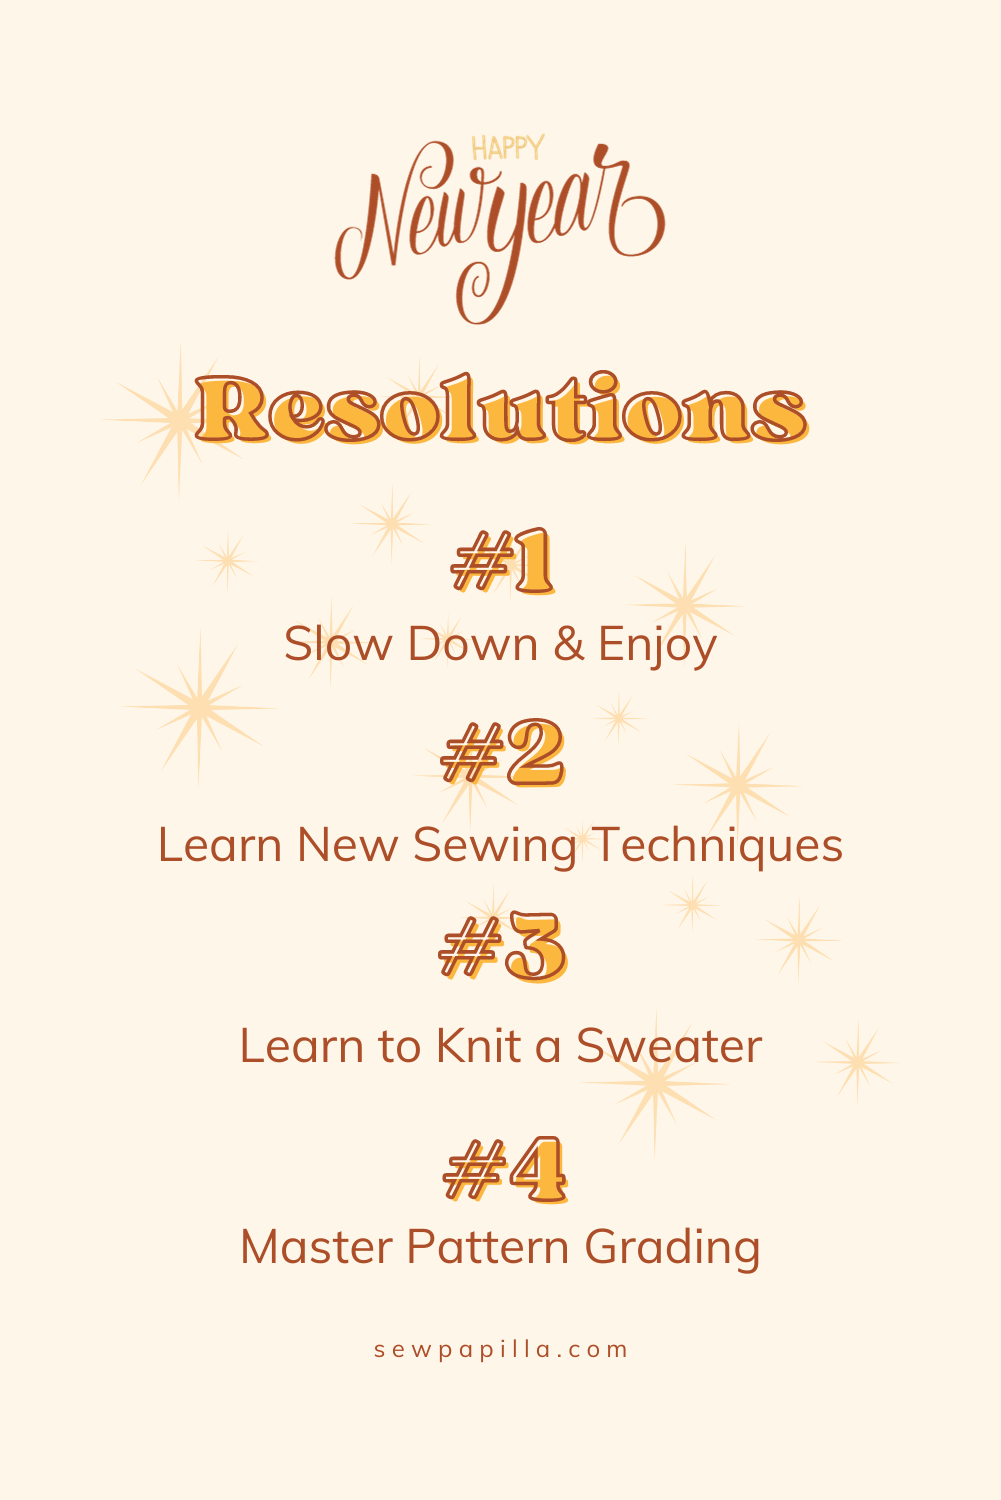 Sewing Resolutions + 2024 Plans for Sewpapilla